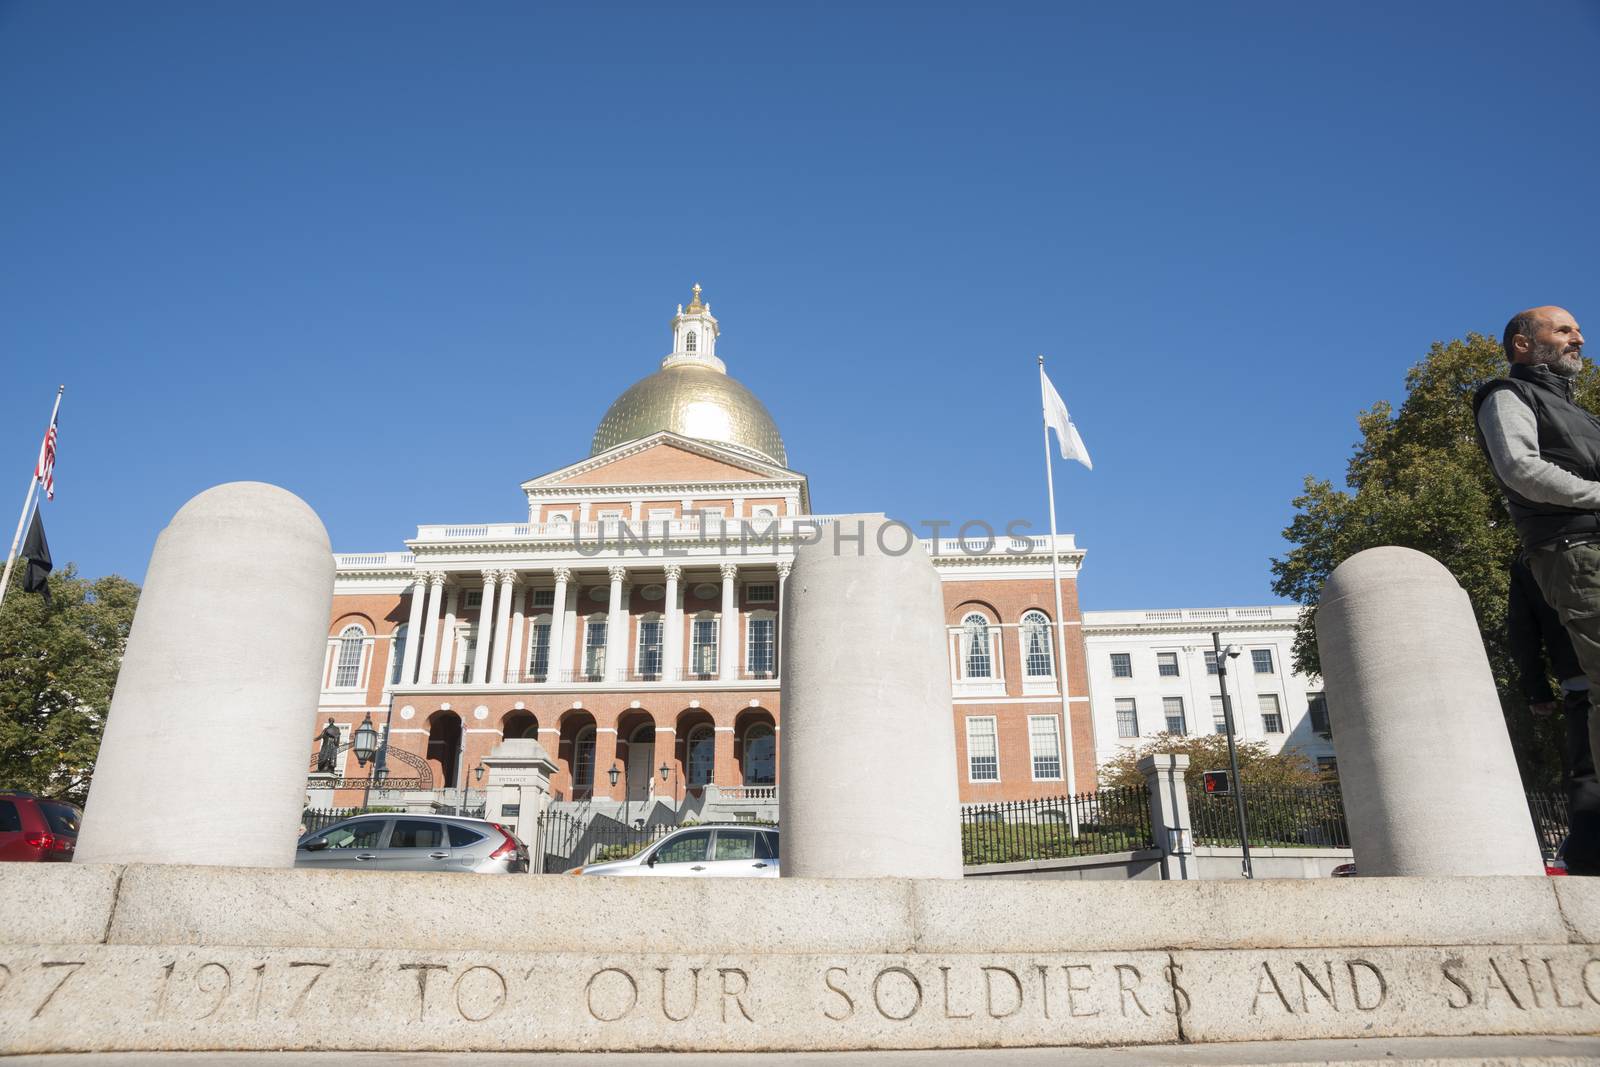 Massachusetts State House is the state capitol and house of government of the state of Massachusetts from memorial steps across road as man walk past.